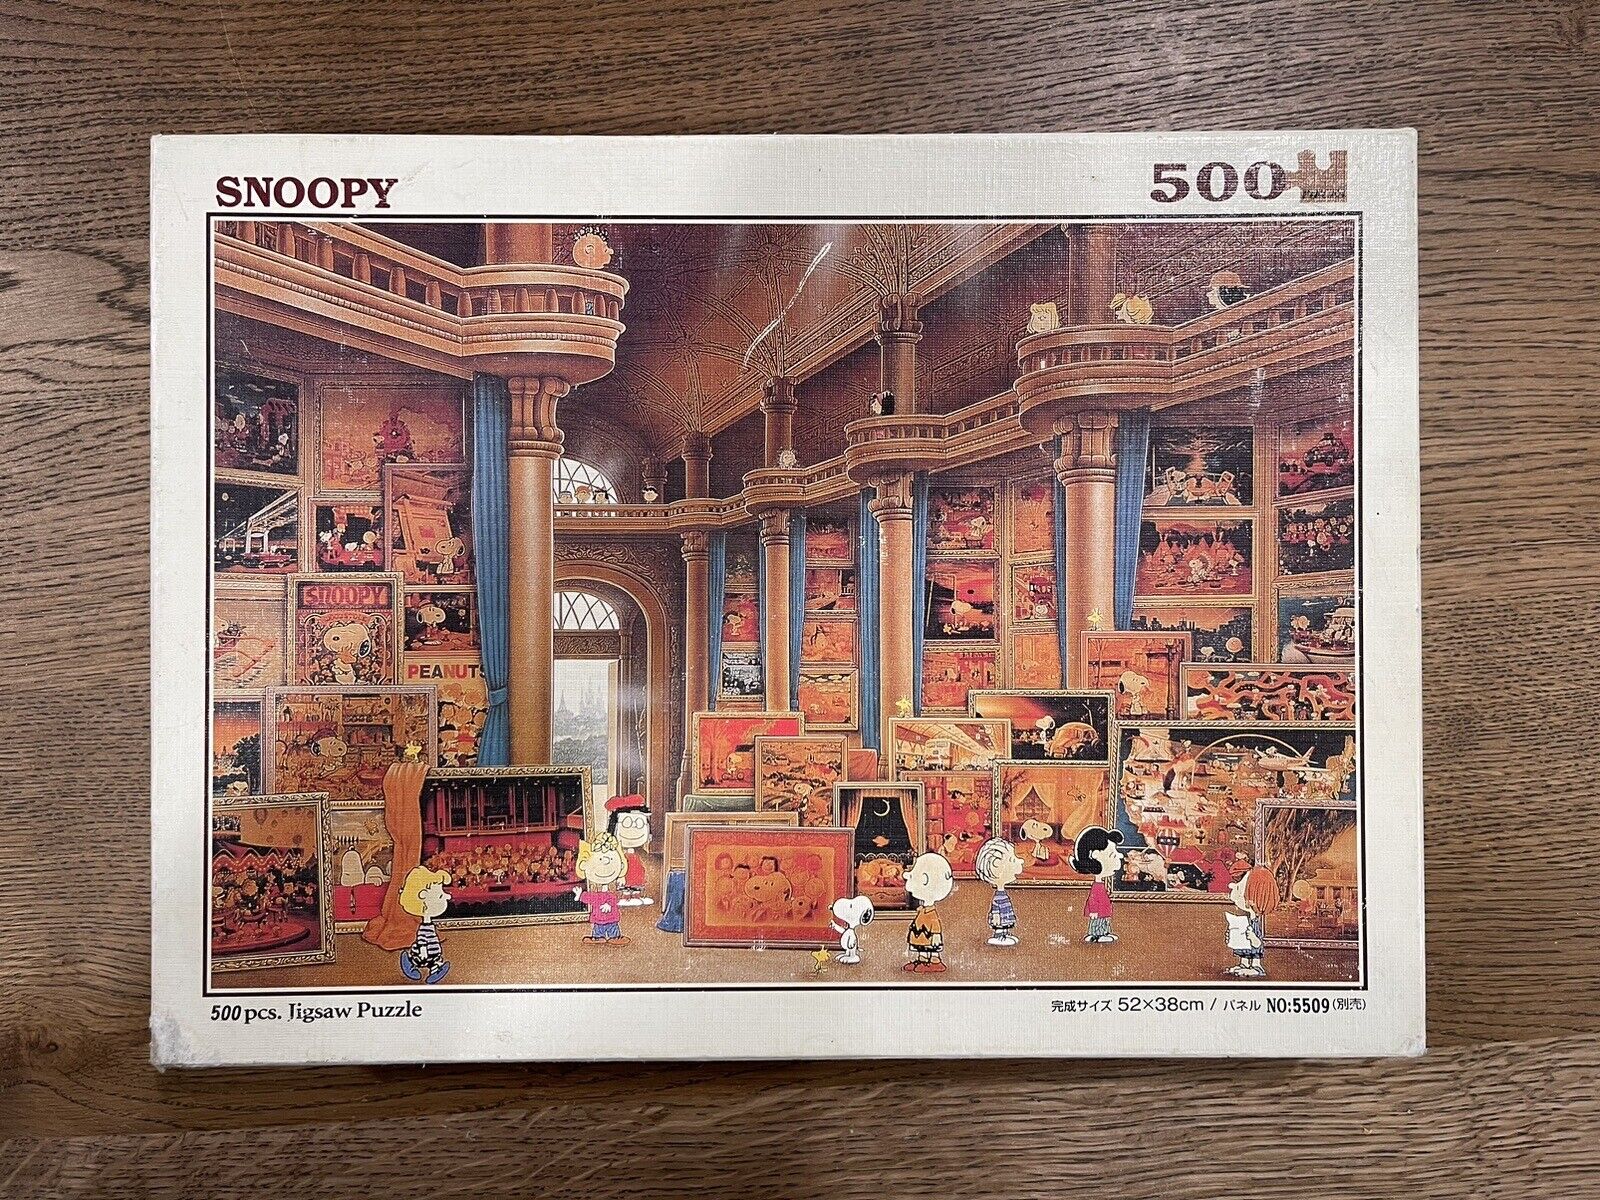 Snoopy Museum Peanuts Gallery 500 Piece Jigsaw Puzzle RARE COLLECTABLE